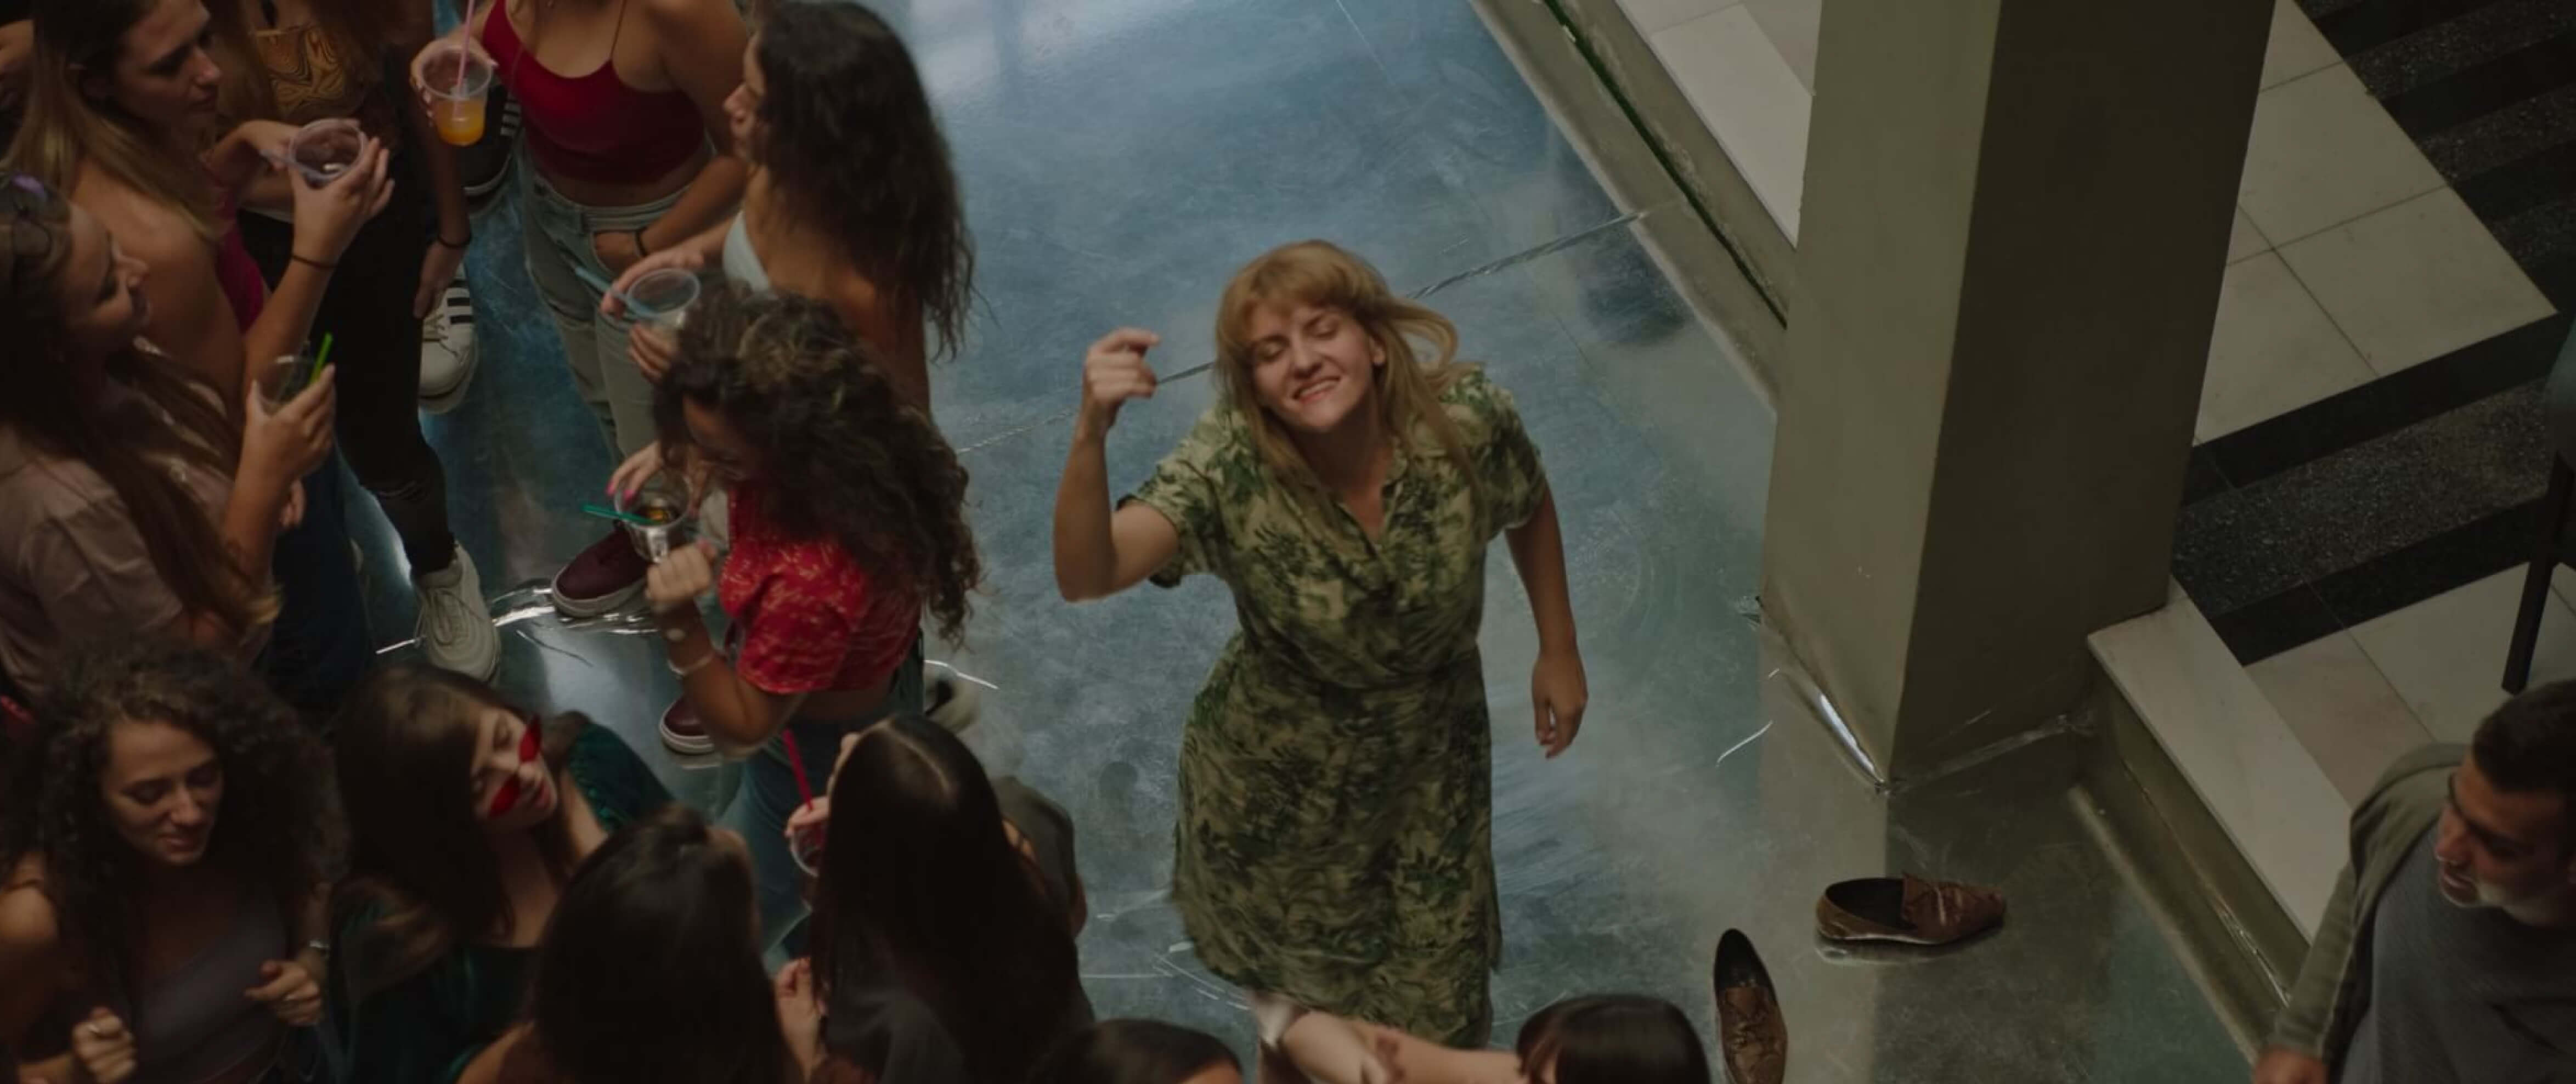 Kordic Kuret finds her place among dancing teens in "The Happiest Man in the World" / Photo courtesy of Pyramide International and the Miami Film Festival